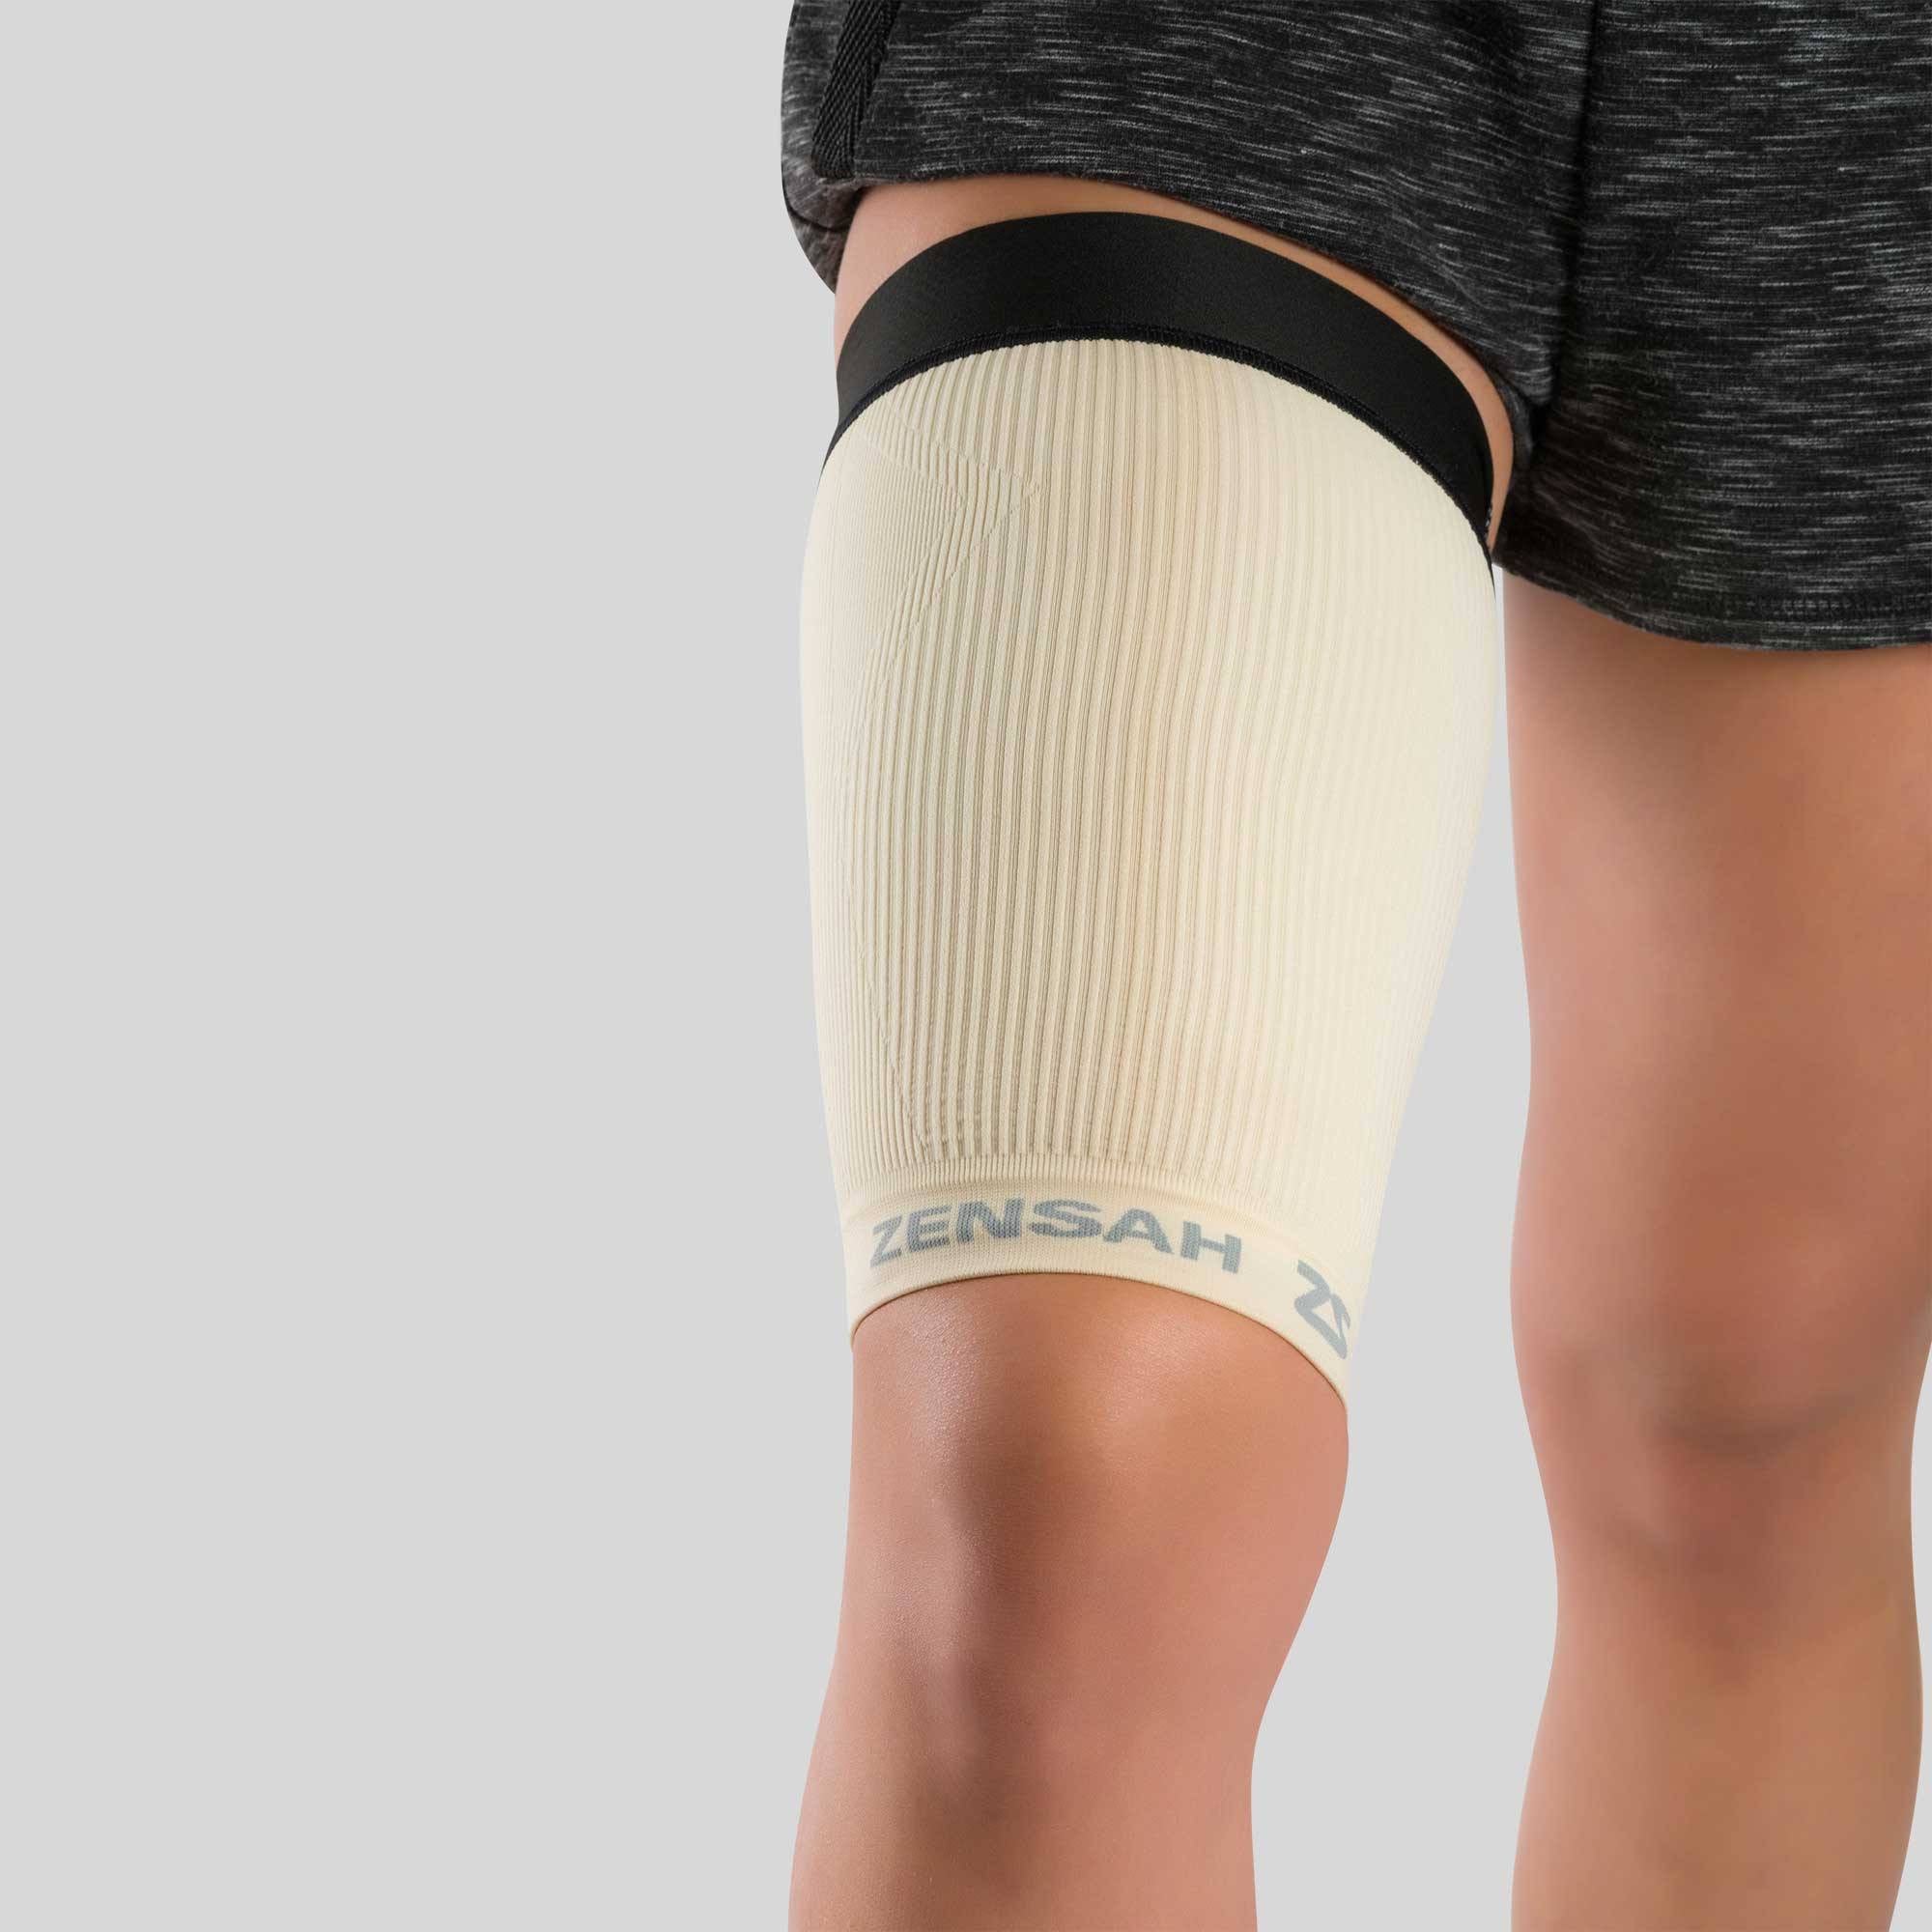 Premium Thigh Compression Sleeves - Support, Prevent Injury, Fast Recovery